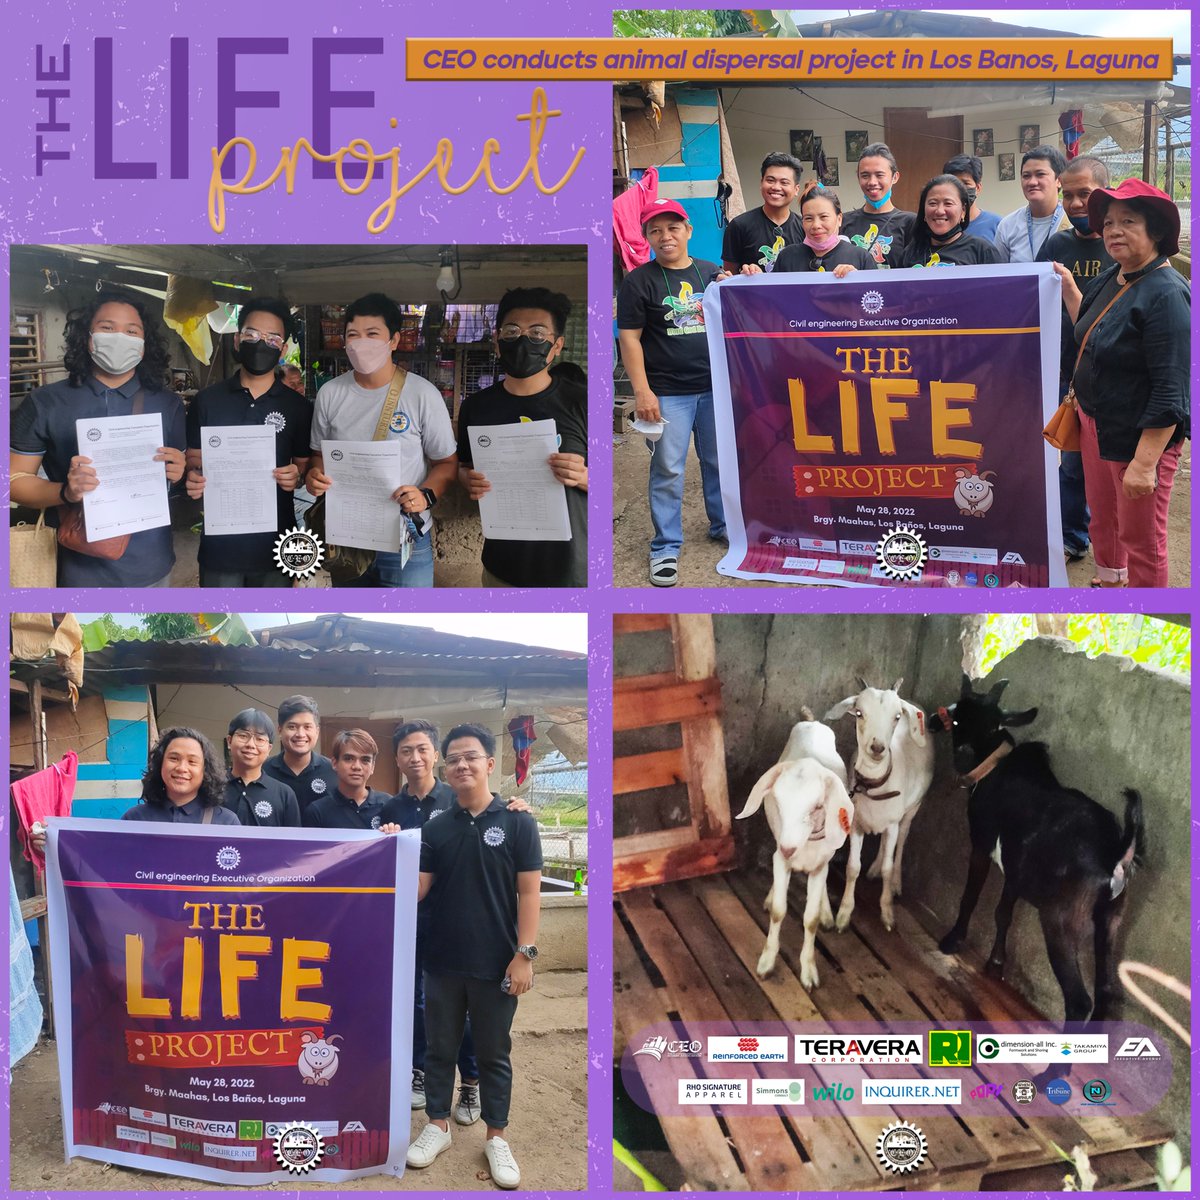 𝙋𝘼𝙔 𝙄𝙏 𝙁𝙊𝙍𝙒𝘼𝙍𝘿
Civil engineering Executive Organization (CEO) has organized the second installment of “The LIFE Project”, the organization’s outreach program for this academic year which is an animal dispersal project. 
#TheLIFEproject 
#CEOoutreachProgram